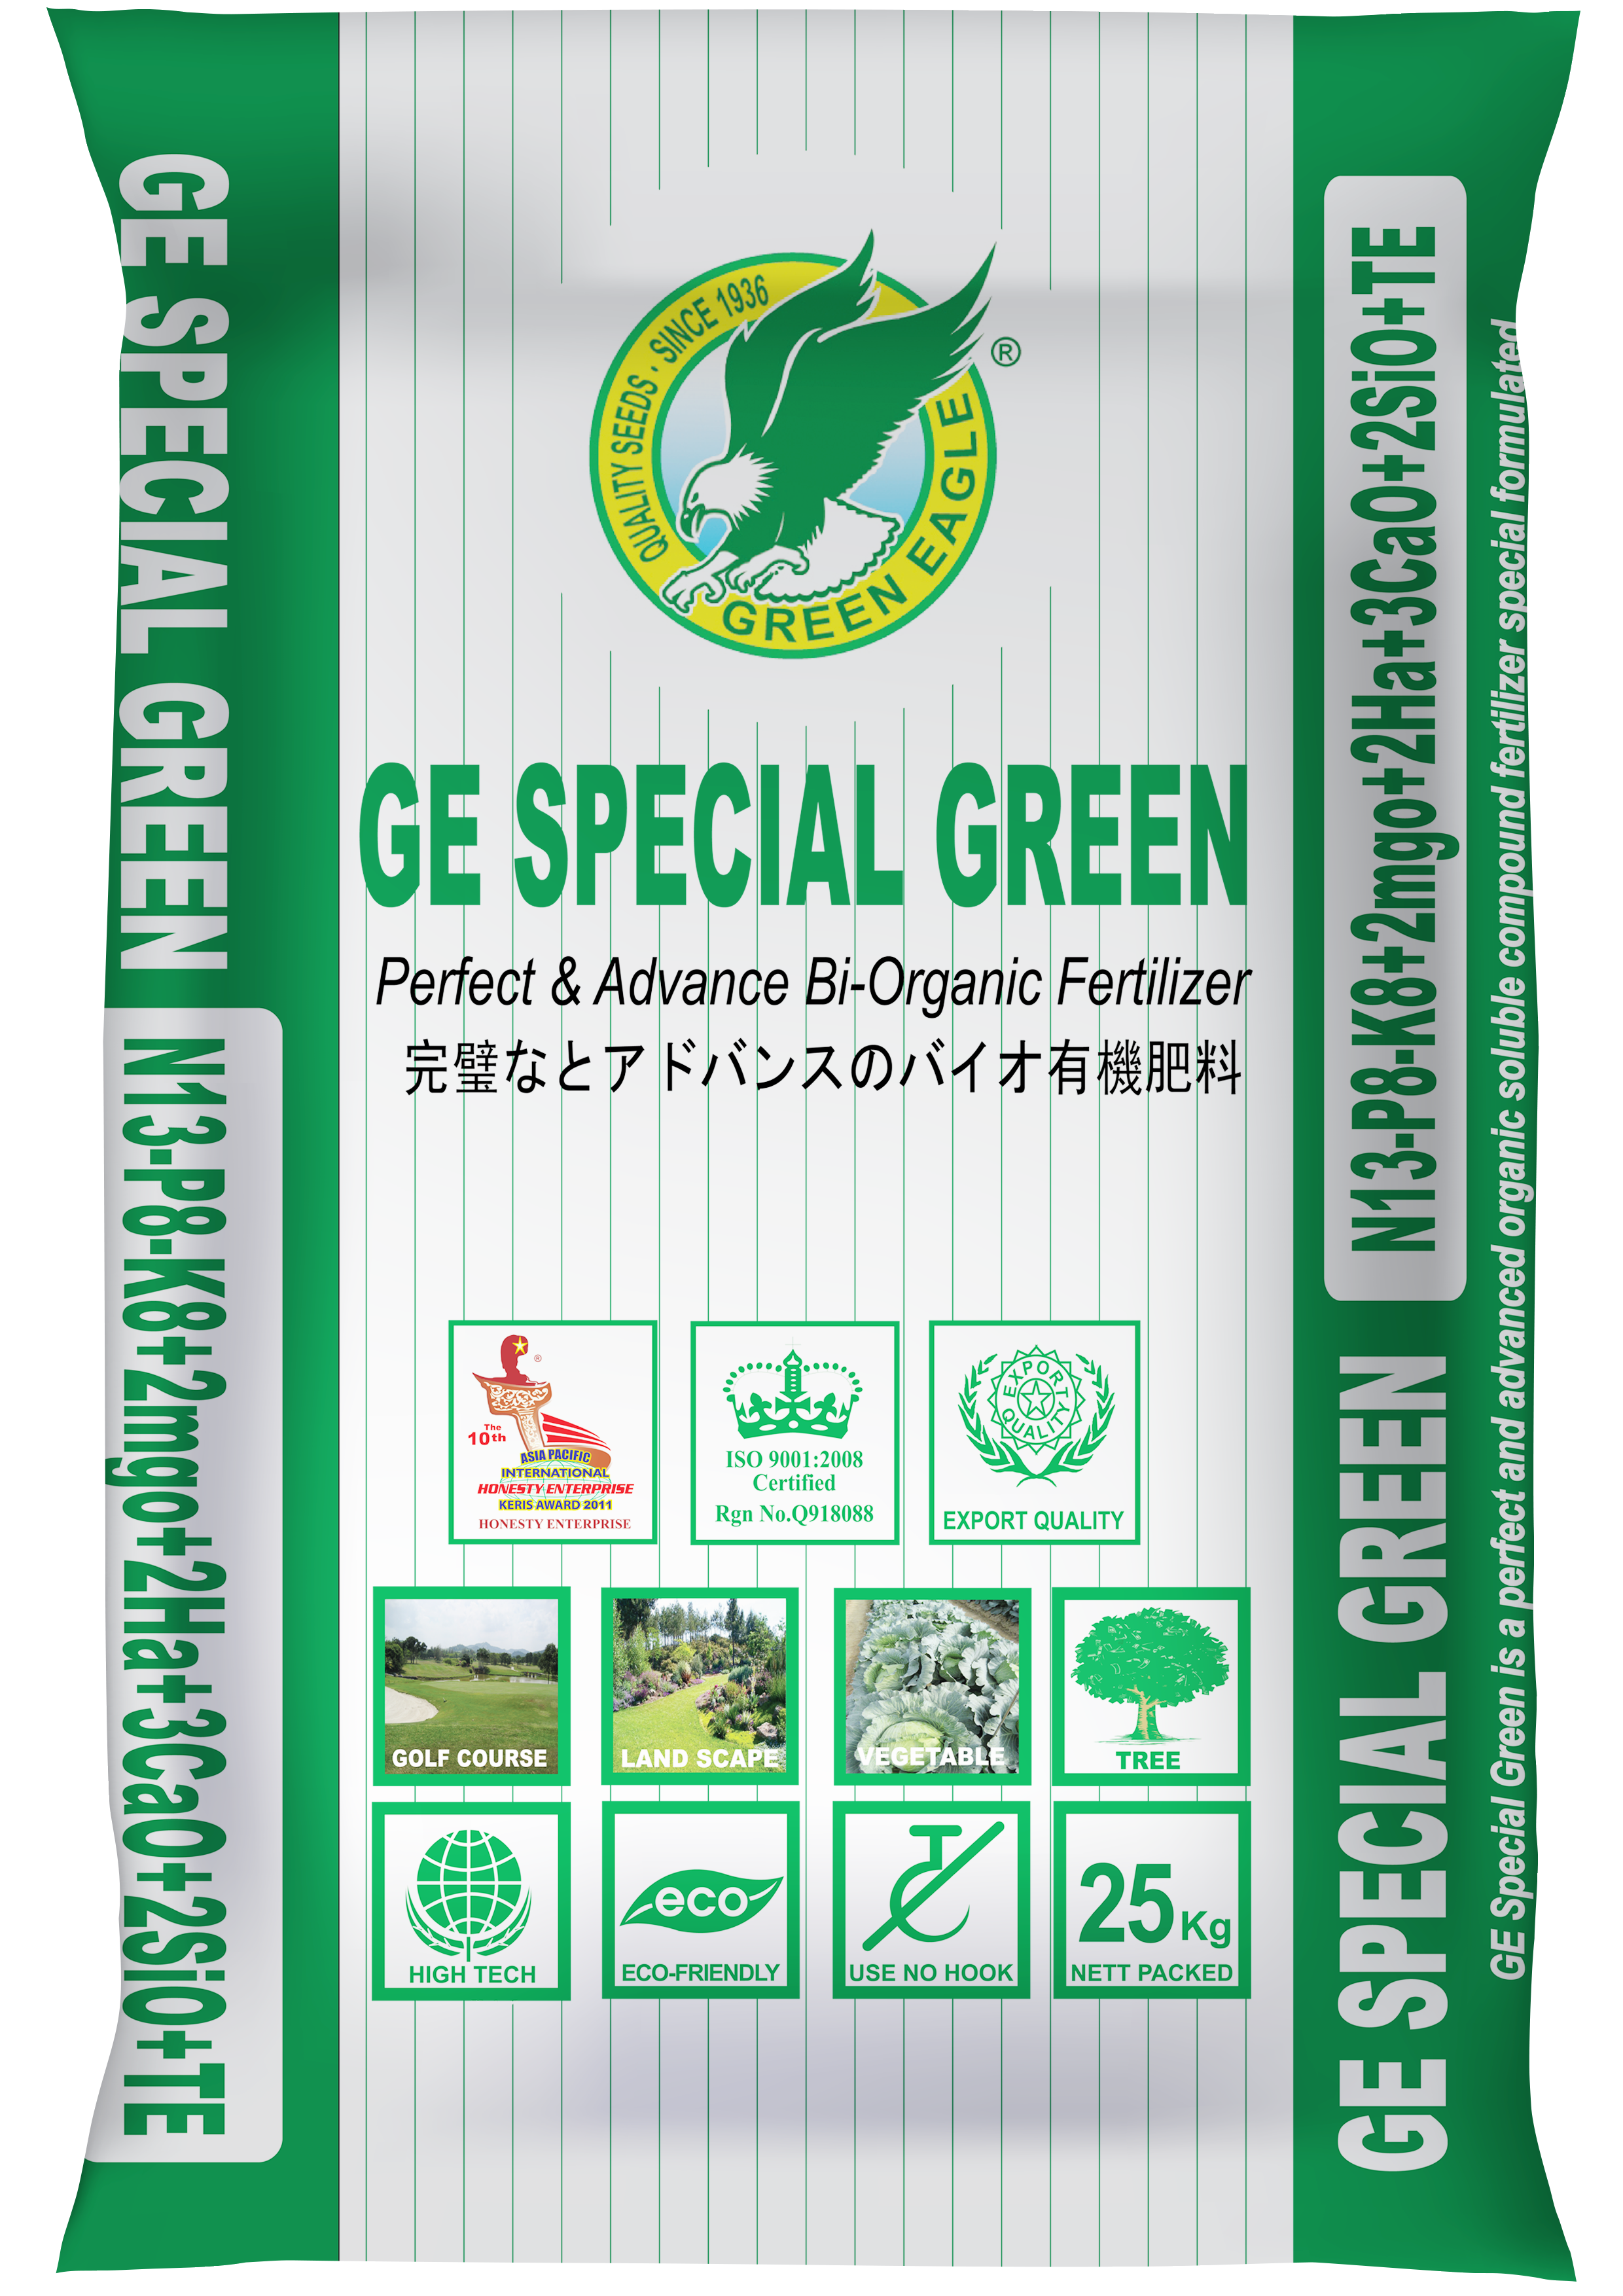 GE Special Green bag design (use this)